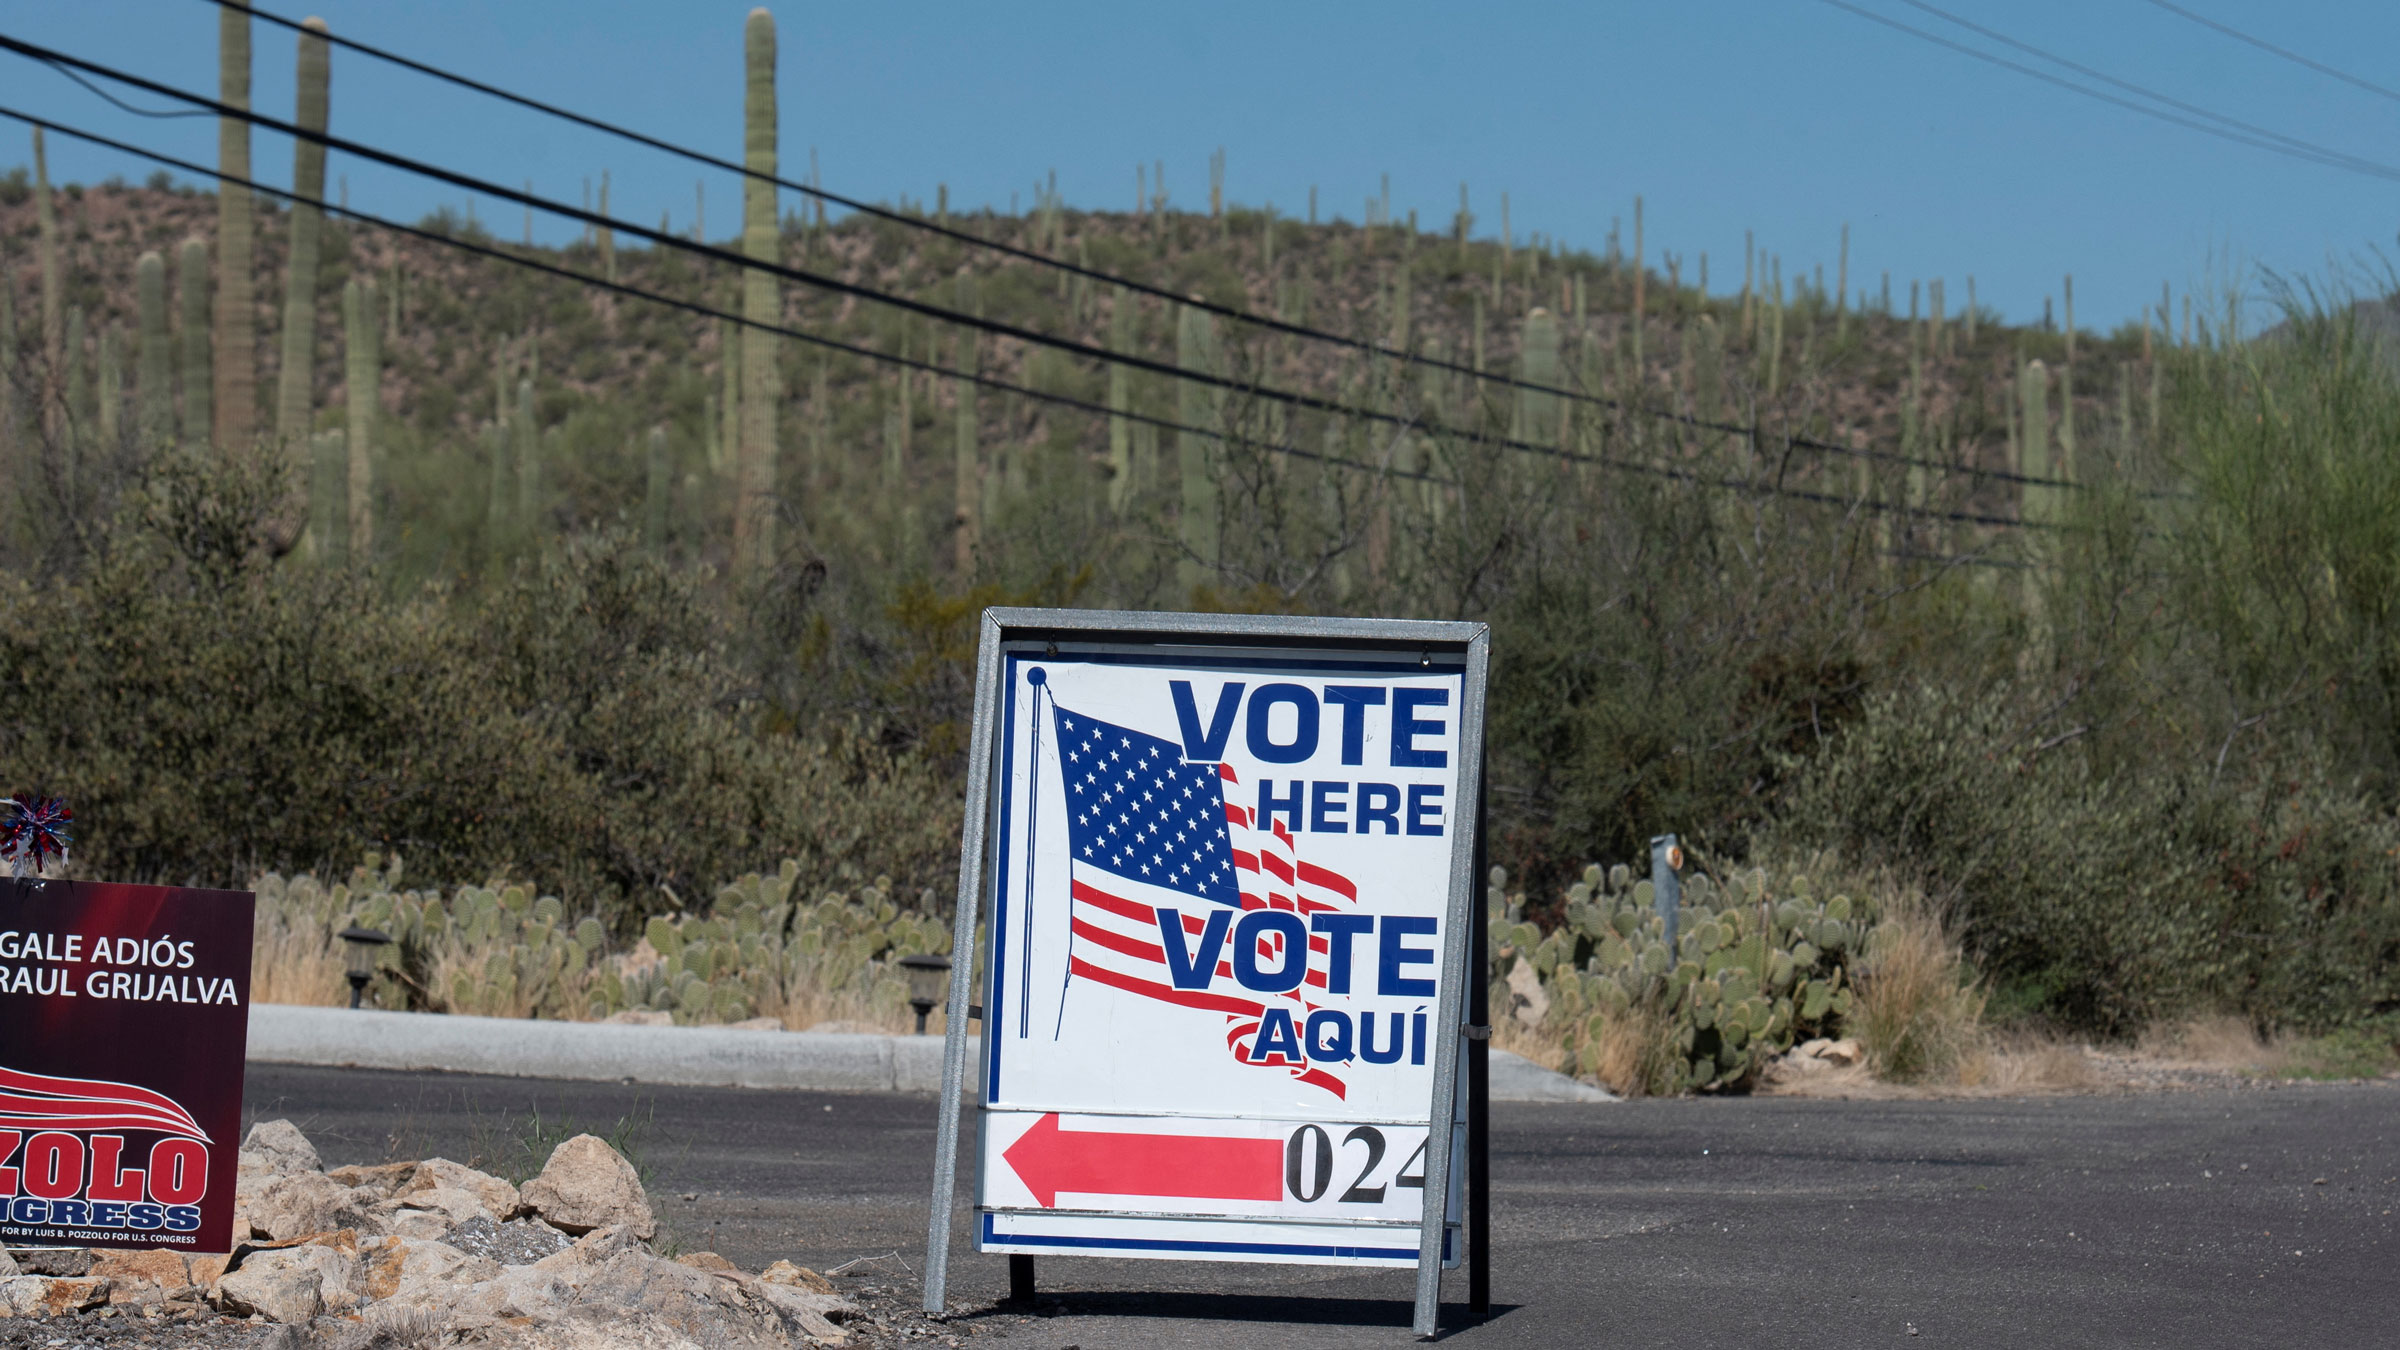 A sign guides voters to a polling station in Tucson, Arizona, on Tuesday.